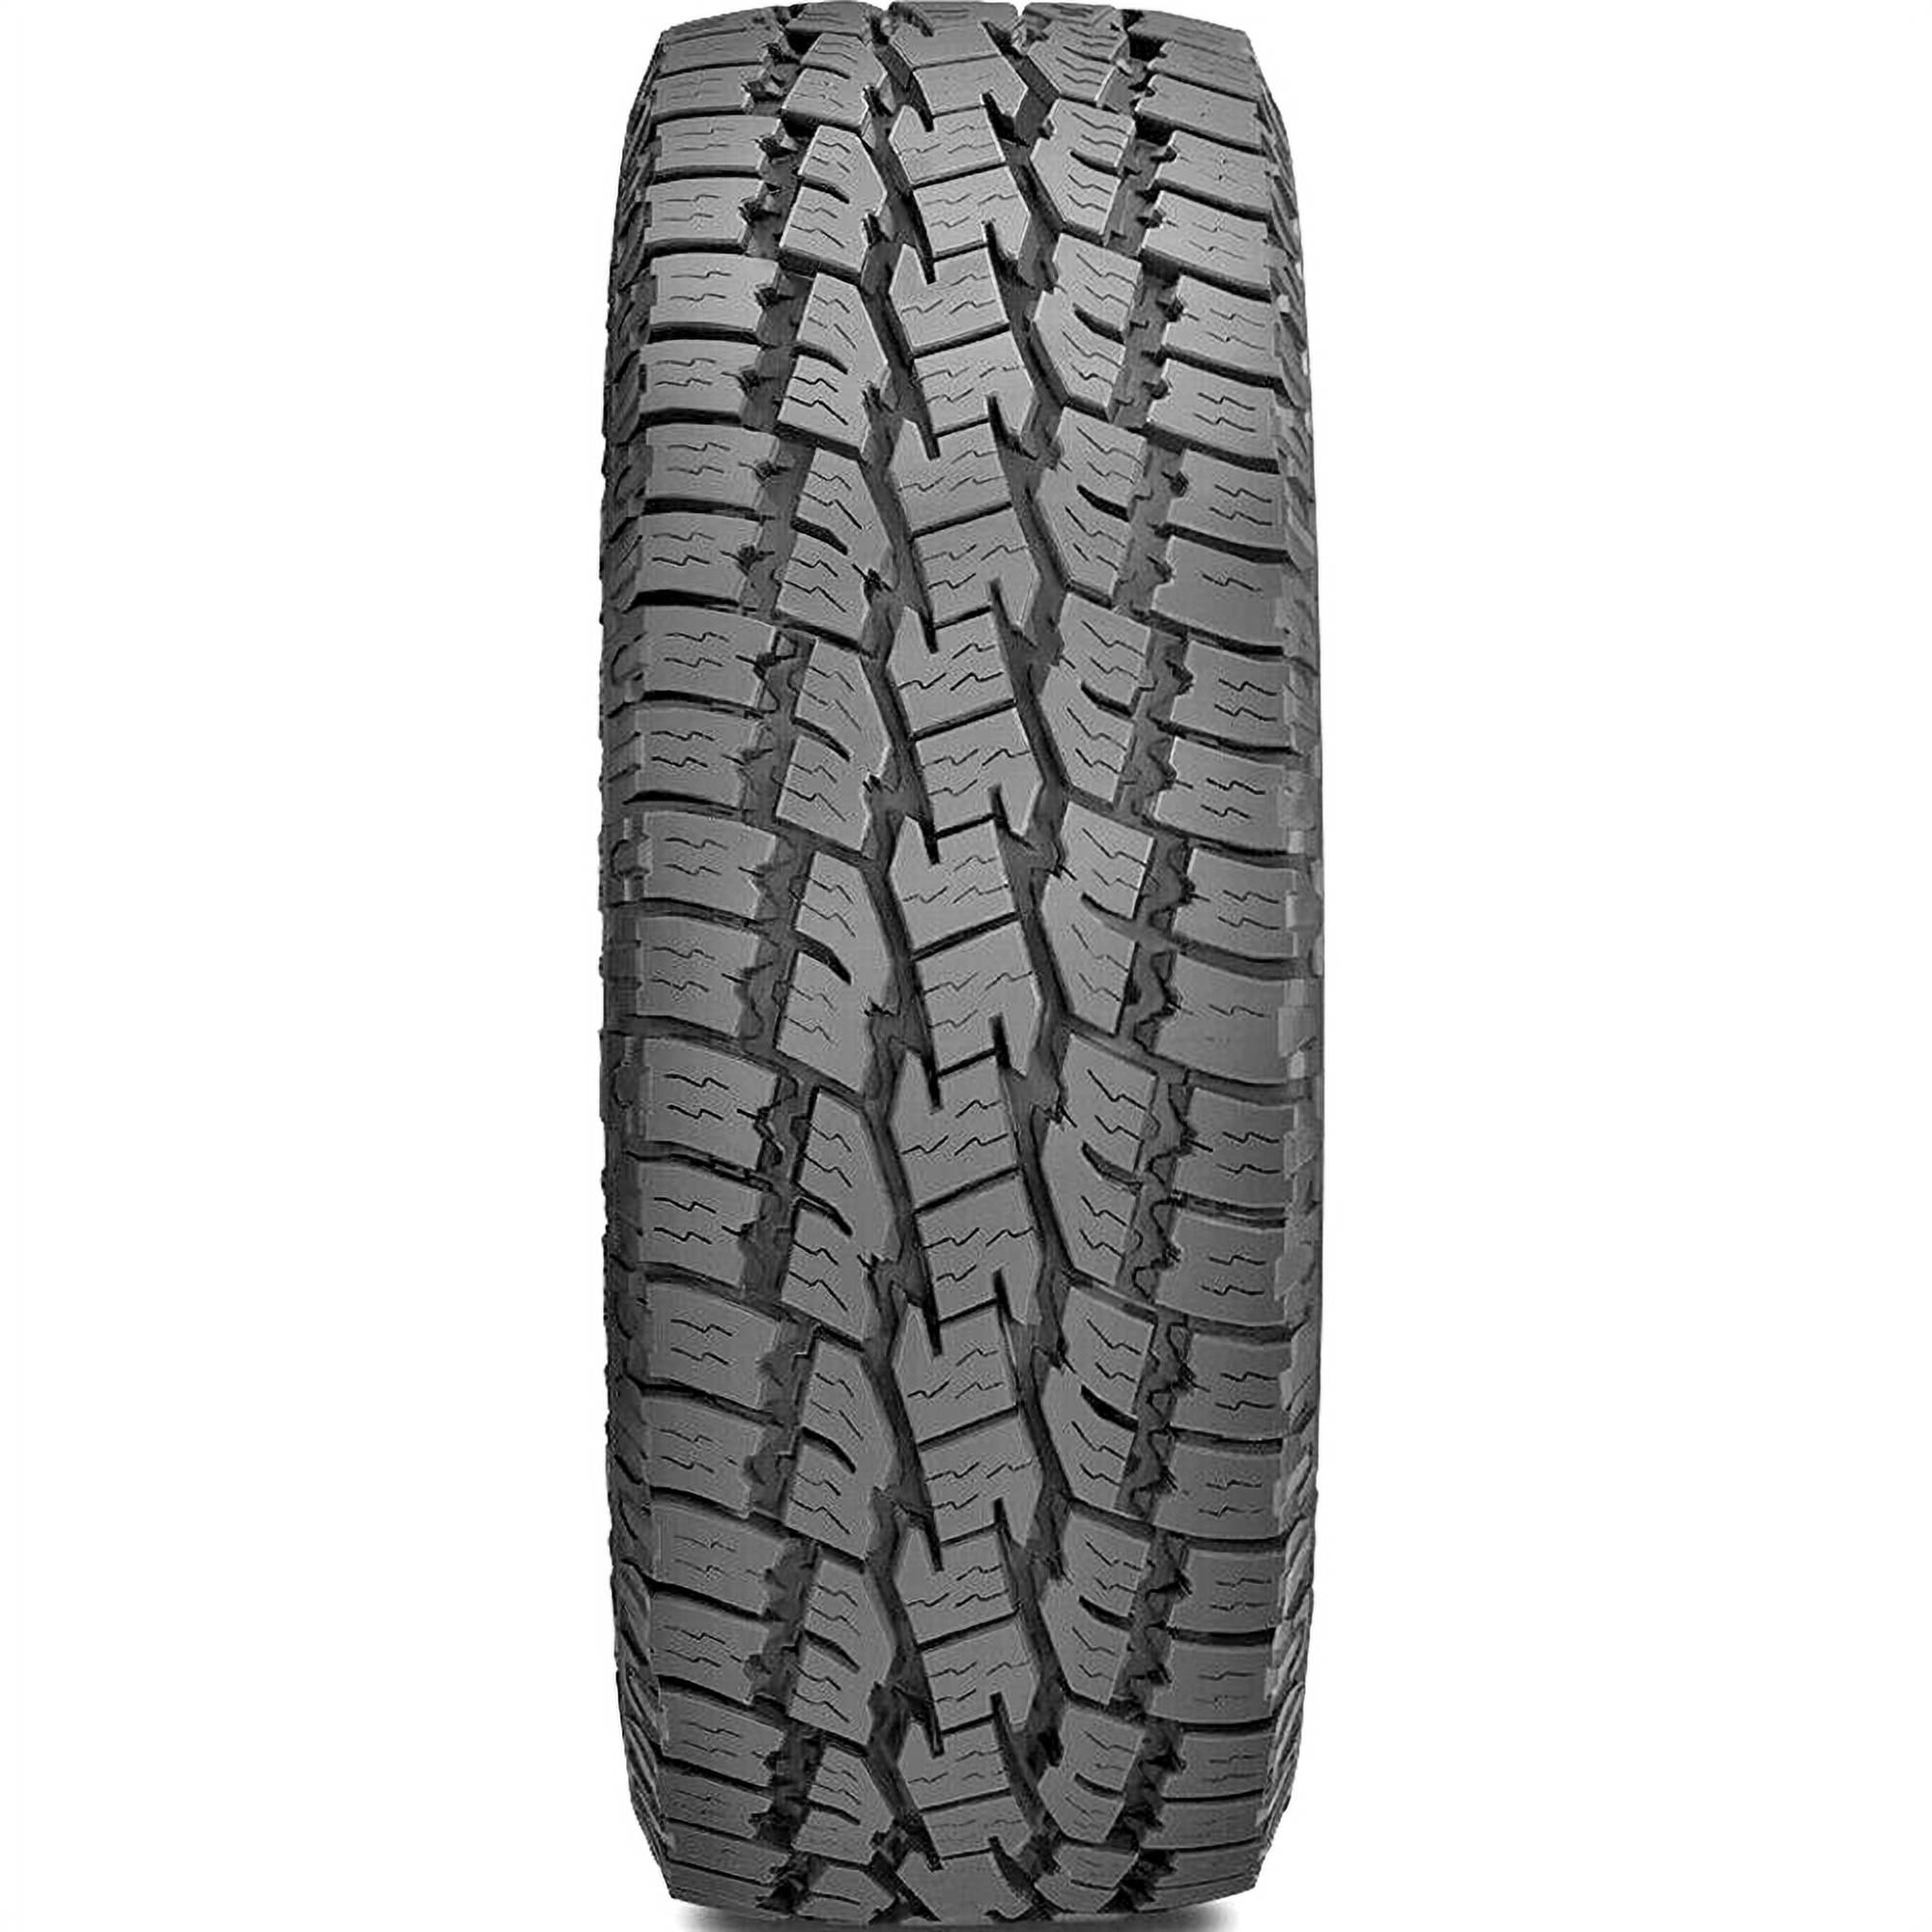 Toyo Open Country A/T II Tire LT265/70R17 121S E/10 Free Shipping NEW 352410